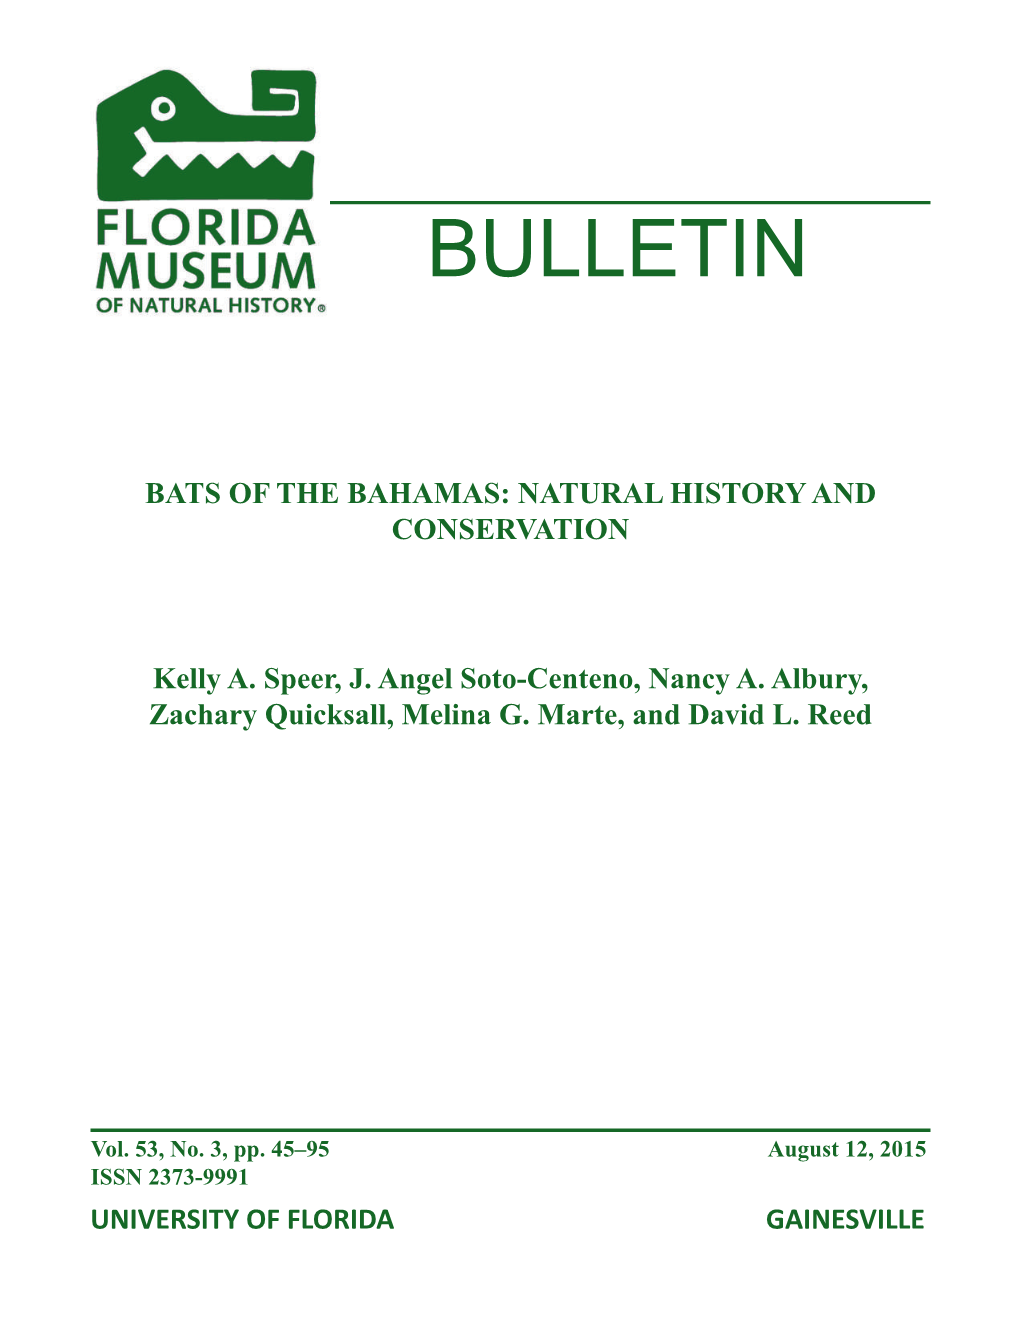 New Paper on Bats of the Bahamas